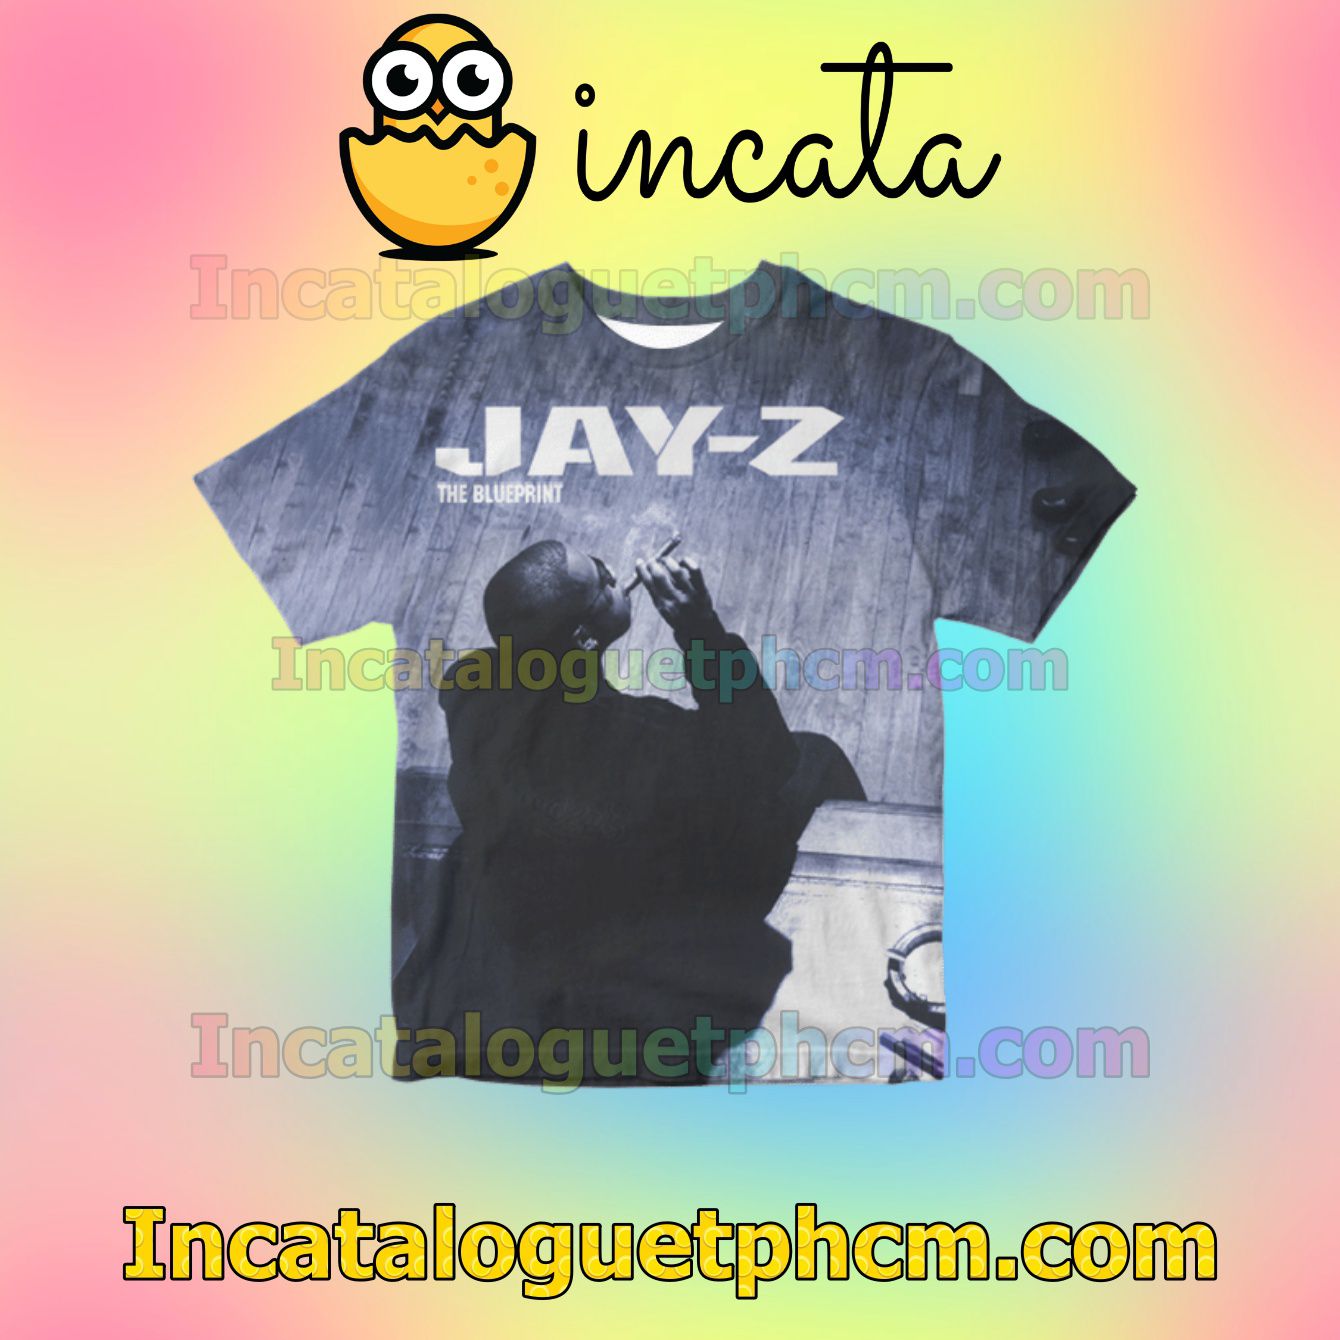 Jay-z The Blueprint Album Cover Personalized Shirt